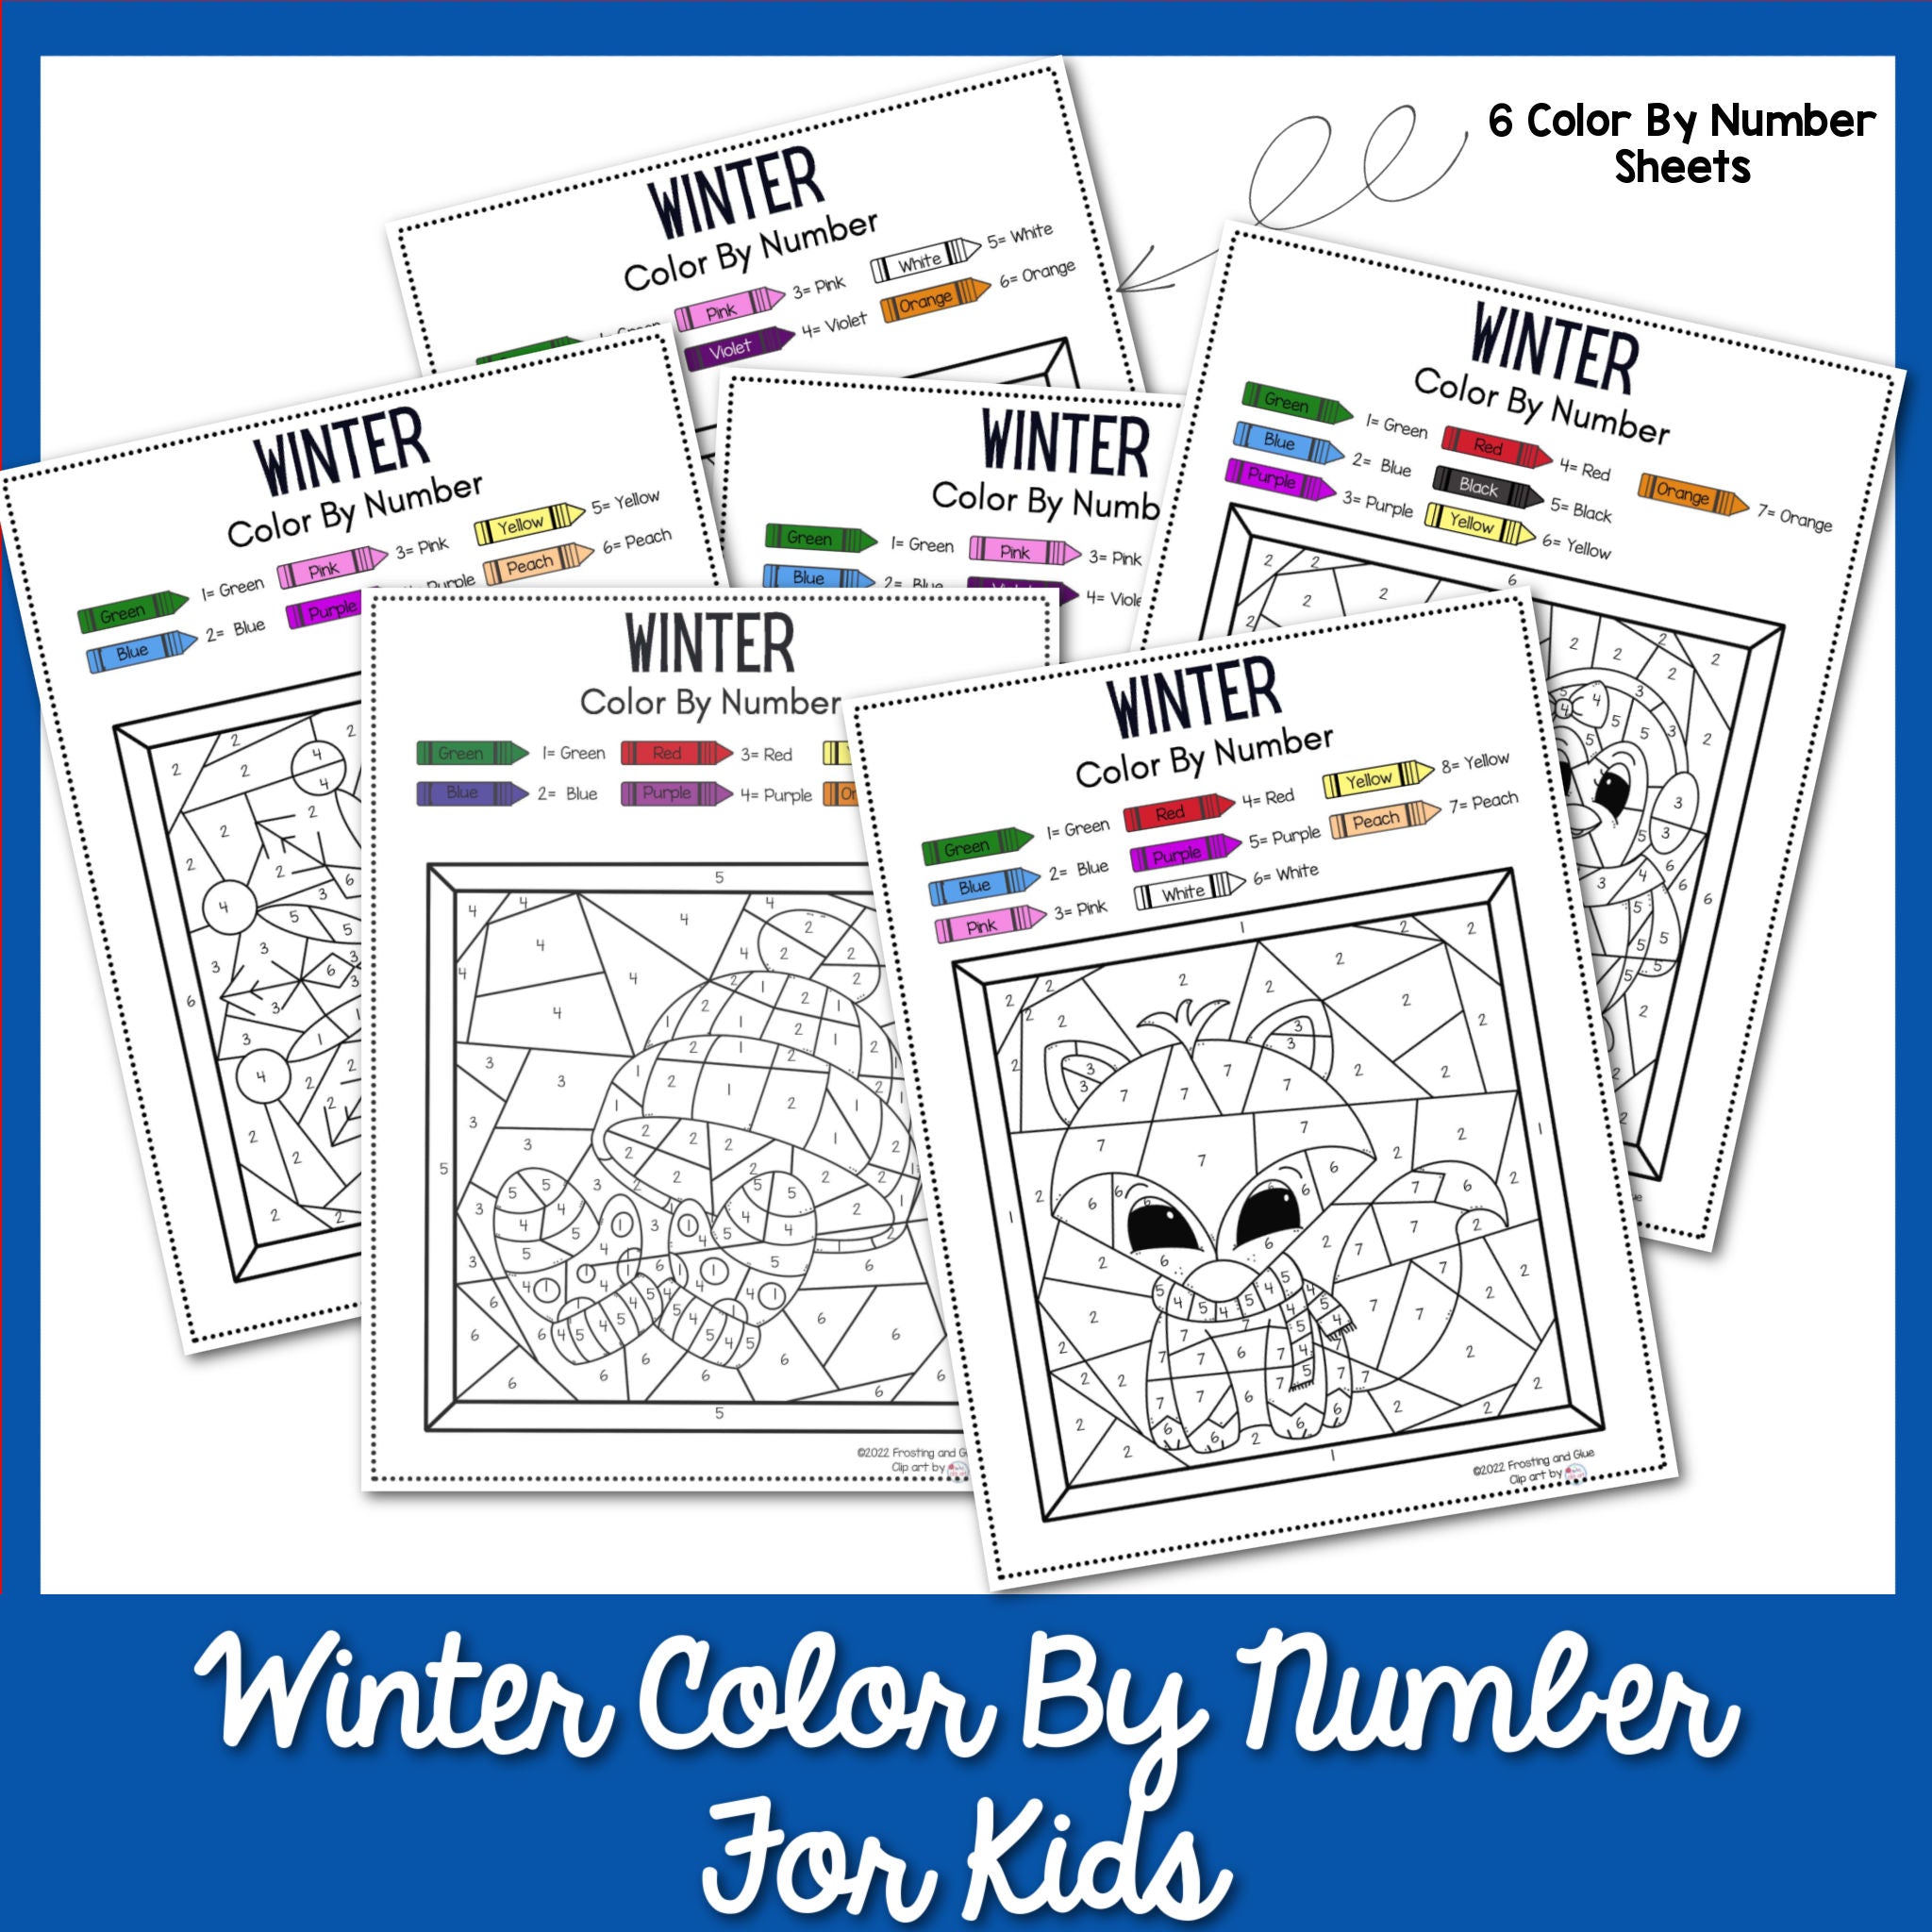 Winter Color By Number For Kids